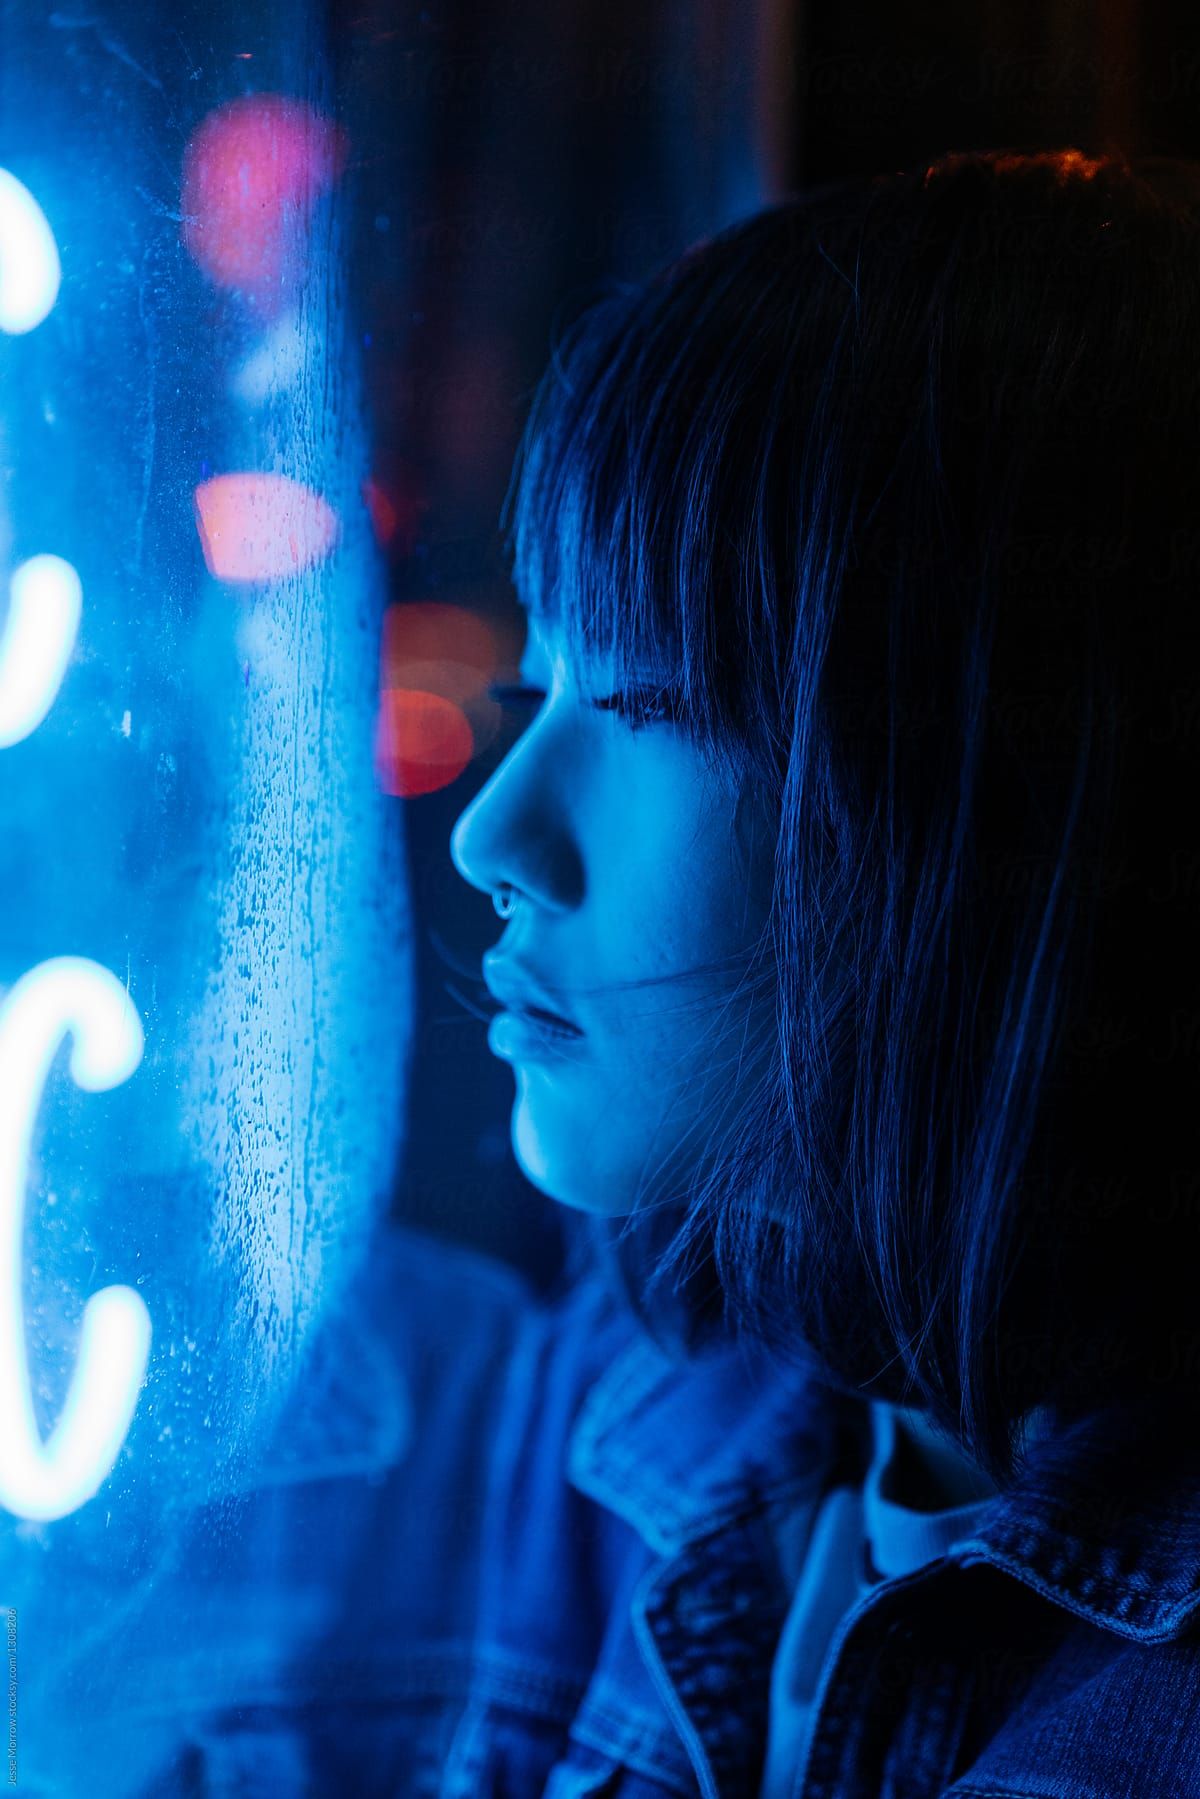 Portrait of young female asian woman next to blue neon lights in urban city environment